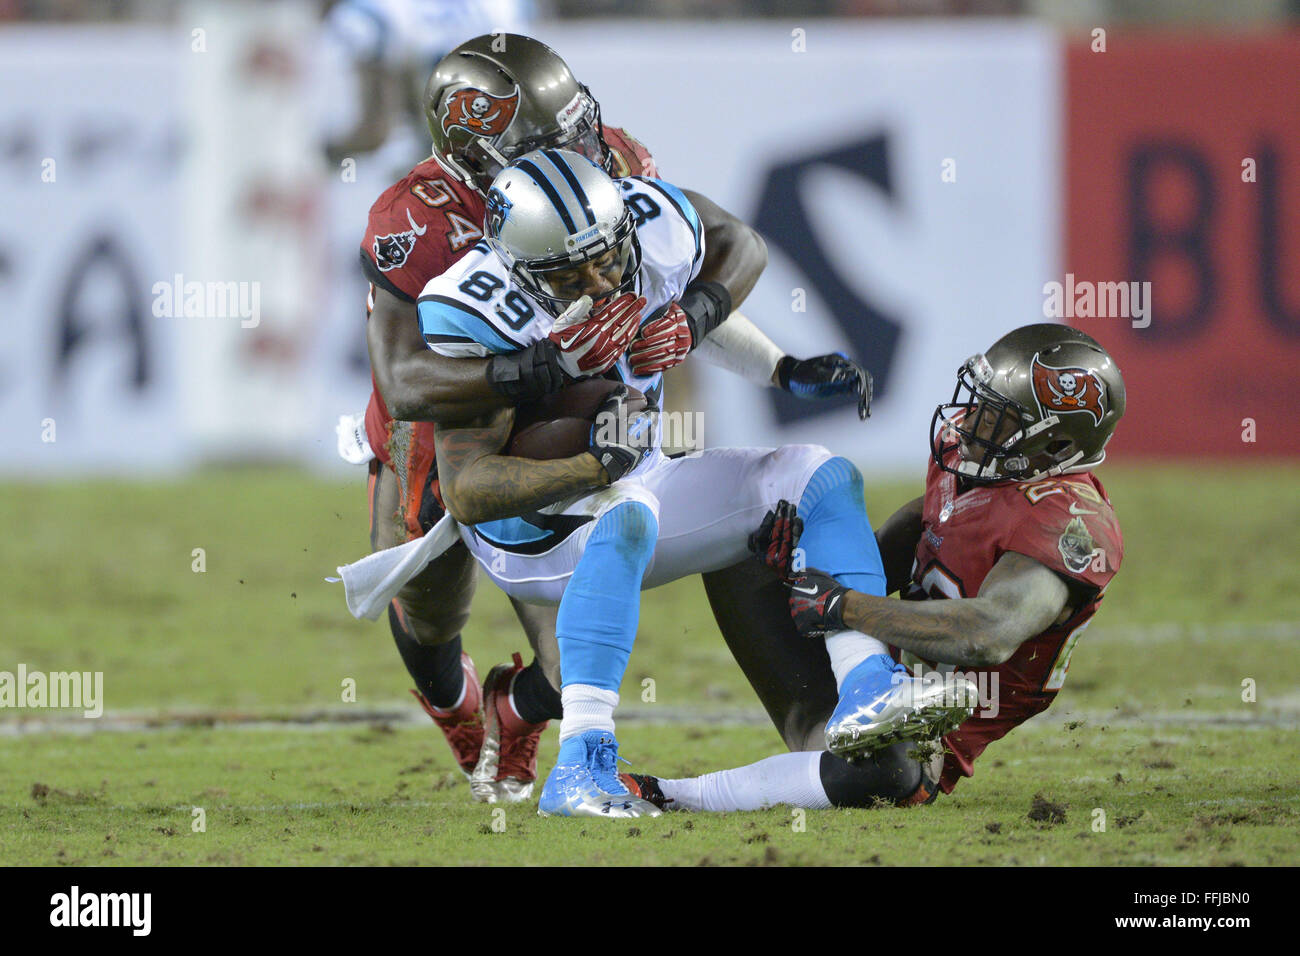 Tampa, FL, USA. 24th Oct, 2013. Carolina Panthers wide receiver Steve Smith (89) is tackled by Tampa Bay Buccaneers outside linebacker Lavonte David (54) and cornerback Leonard Johnson (29) during the Panthers 21-6 win over the Buccaneers at Raymond James Stadium on October 24, 2013 in Tampa, Florida. ZUMA PRESS/Scott A. Miller © Scott A. Miller/ZUMA Wire/Alamy Live News Stock Photo